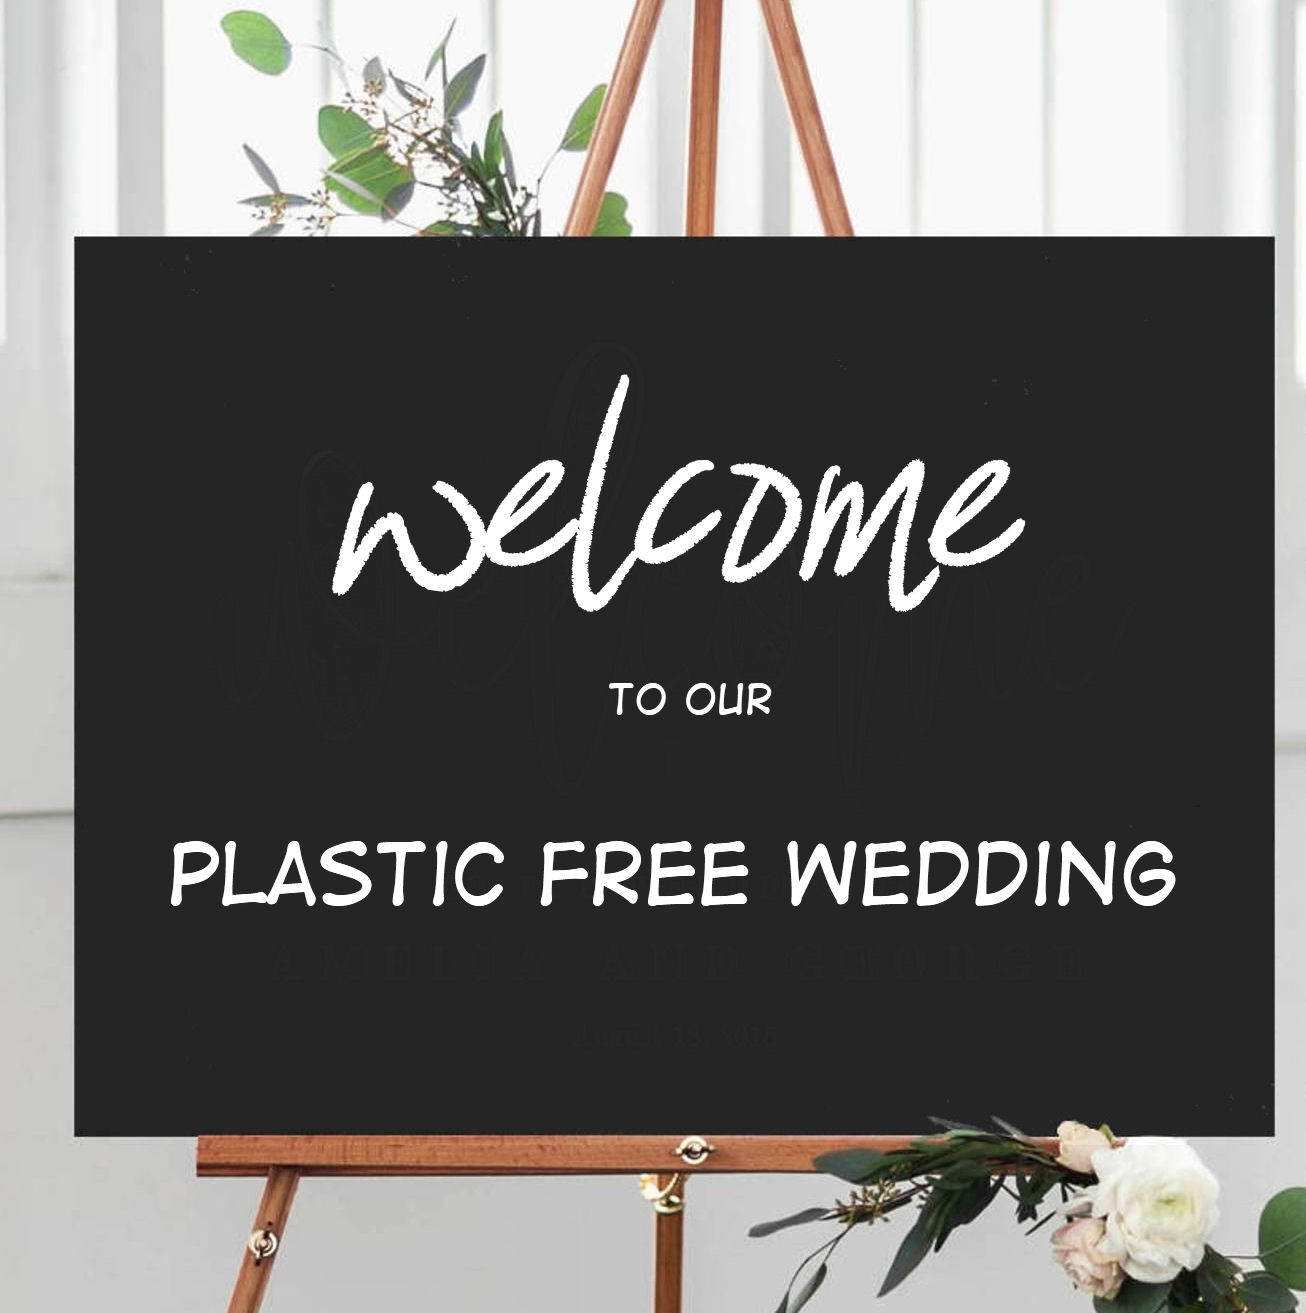 Welcome to our plastic free
                      weddingbBlackboard sign on easel with white
                      flowers and green leaves